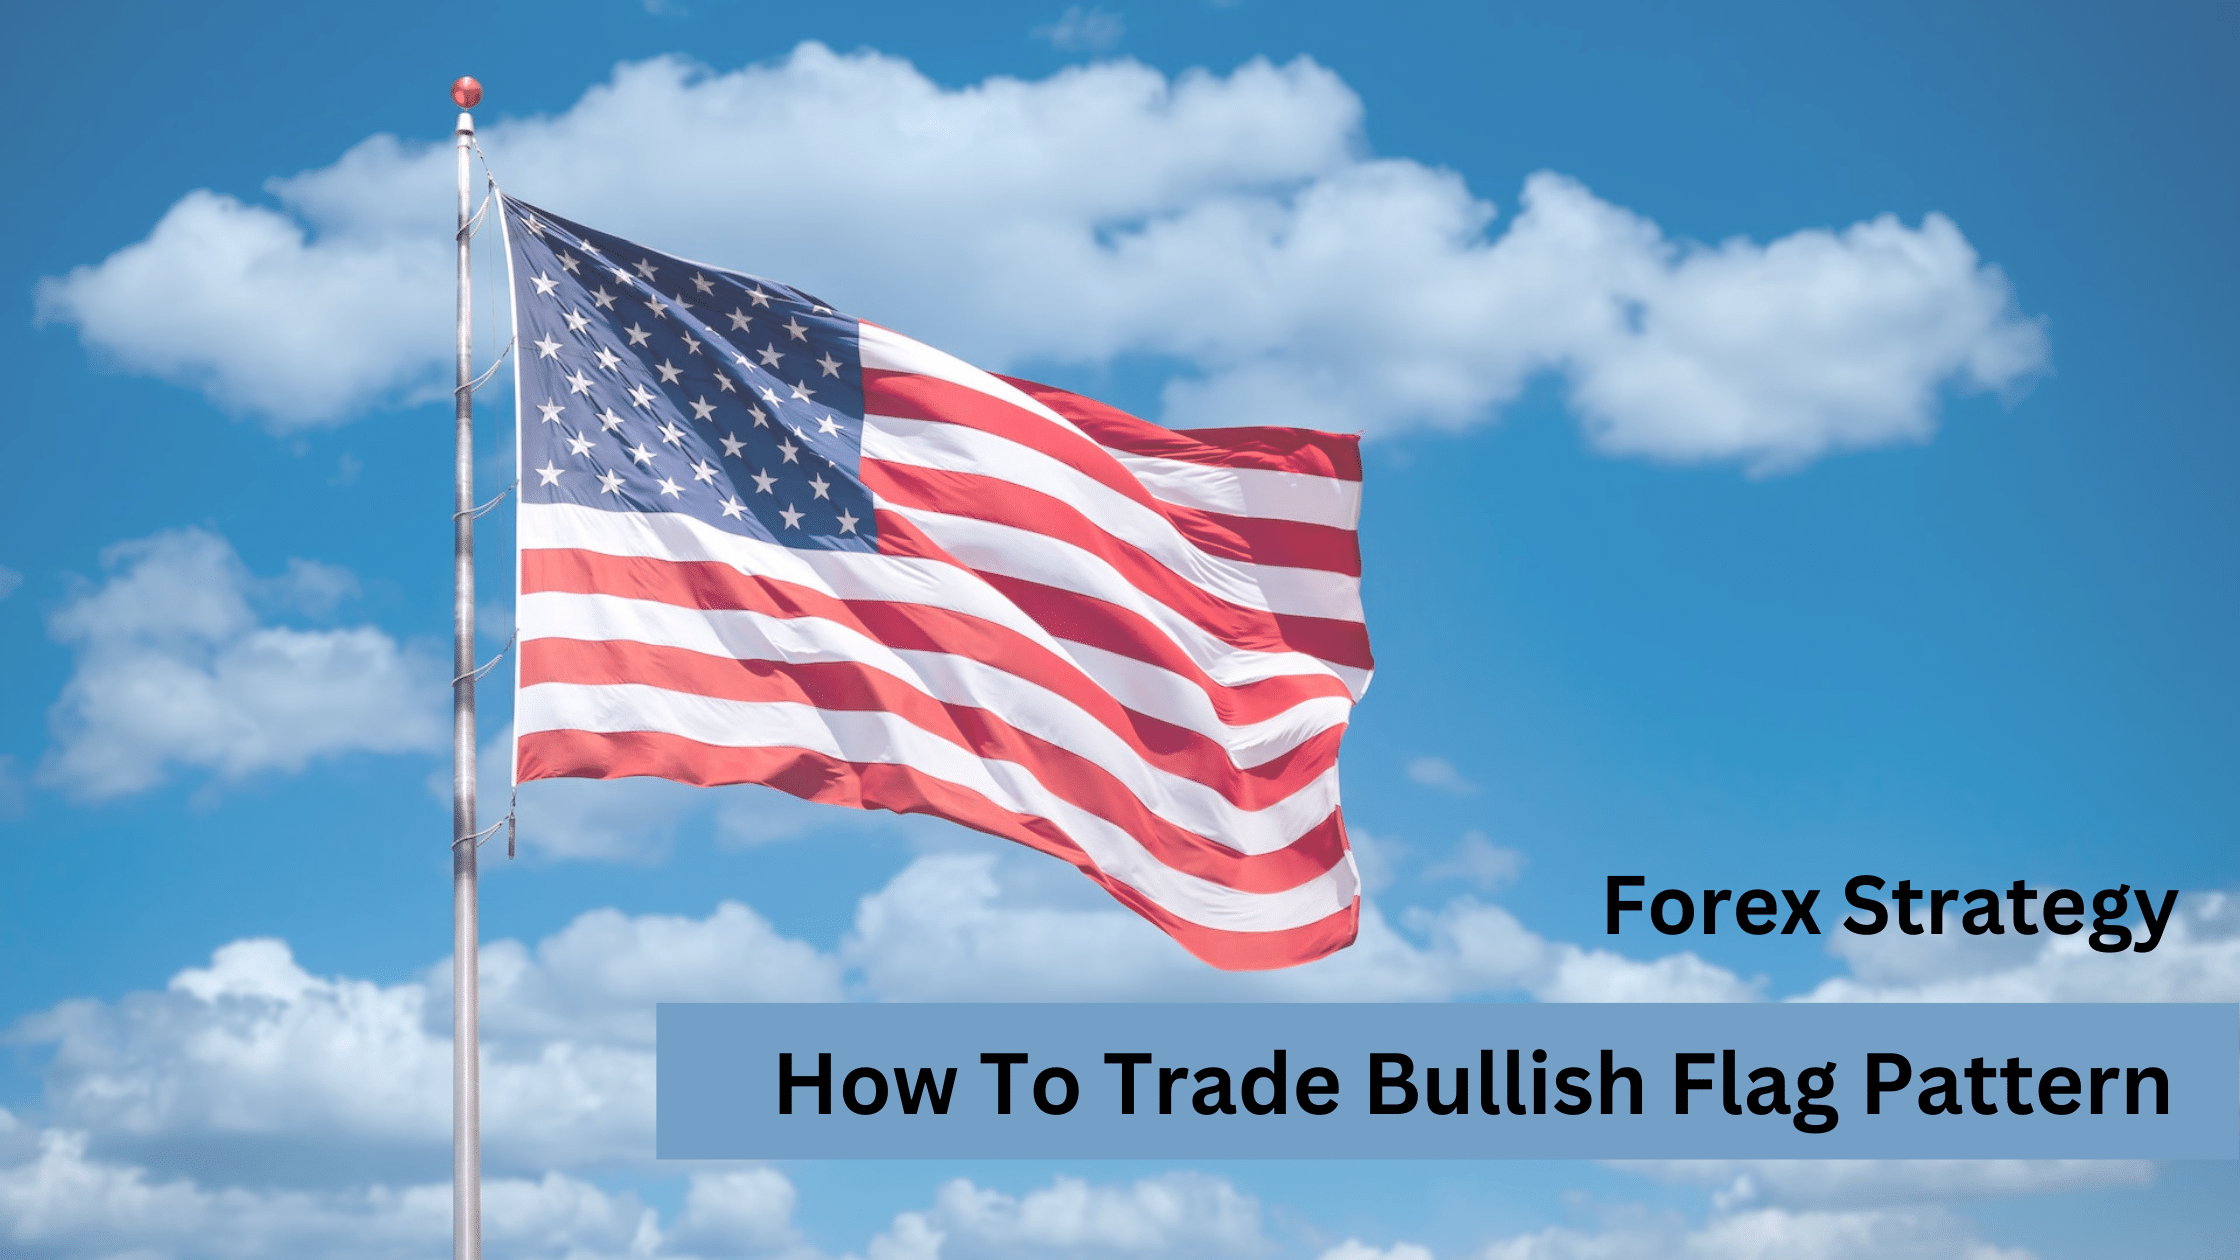 How To Trade Bull Flag Pattern